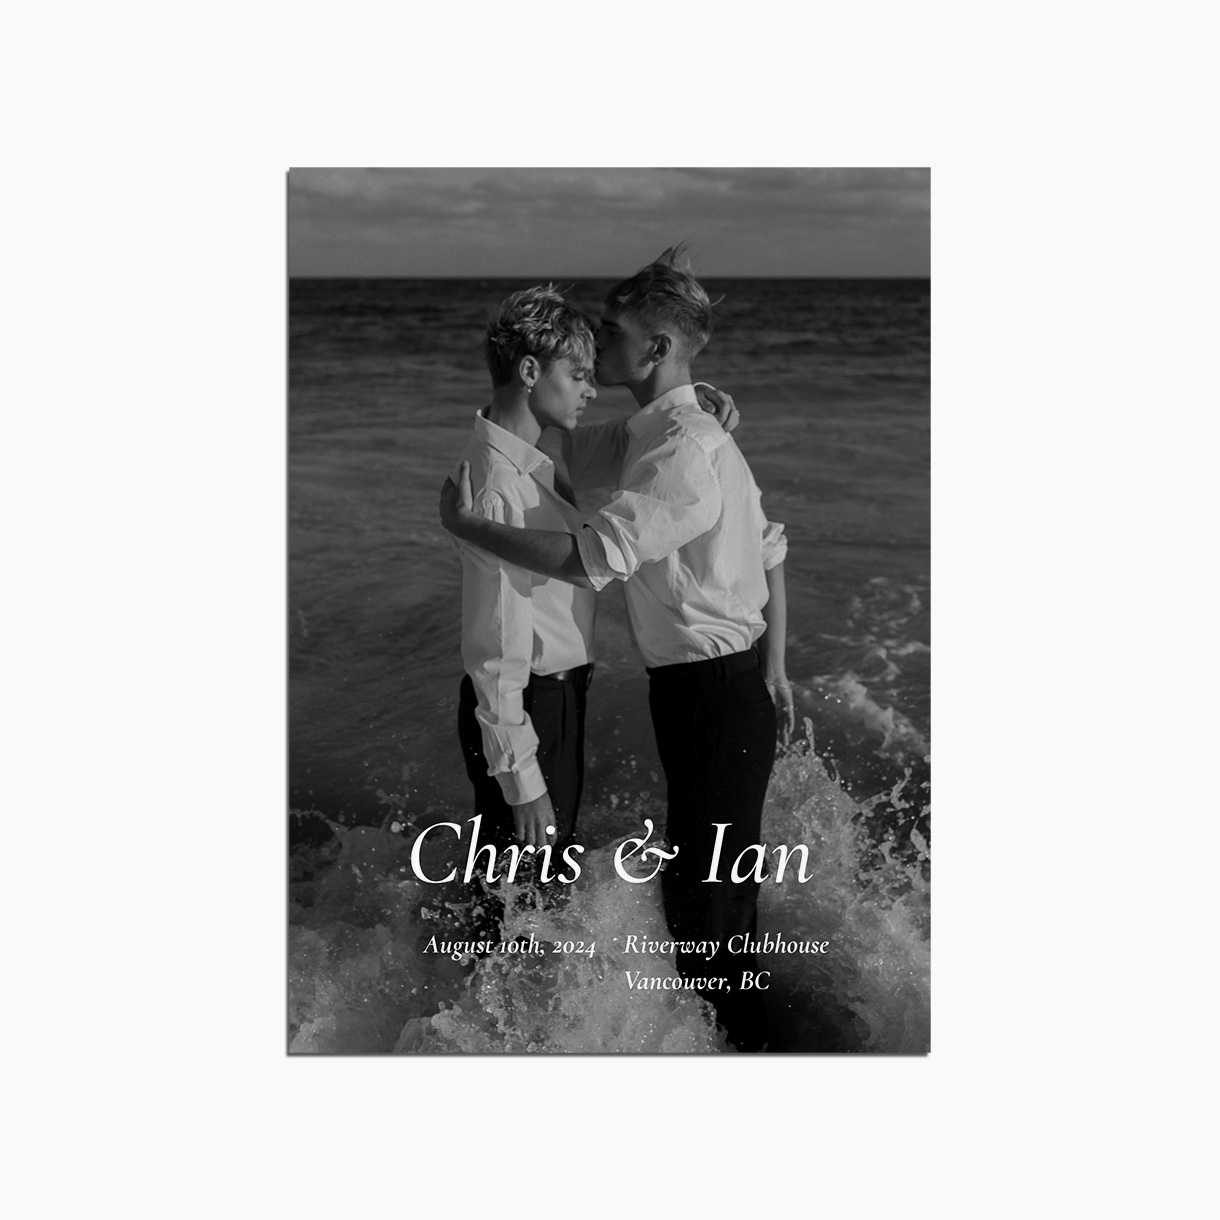 Save the Date wedding invitation card showing two people embracing on a beach. Title reads: Chris & Ian